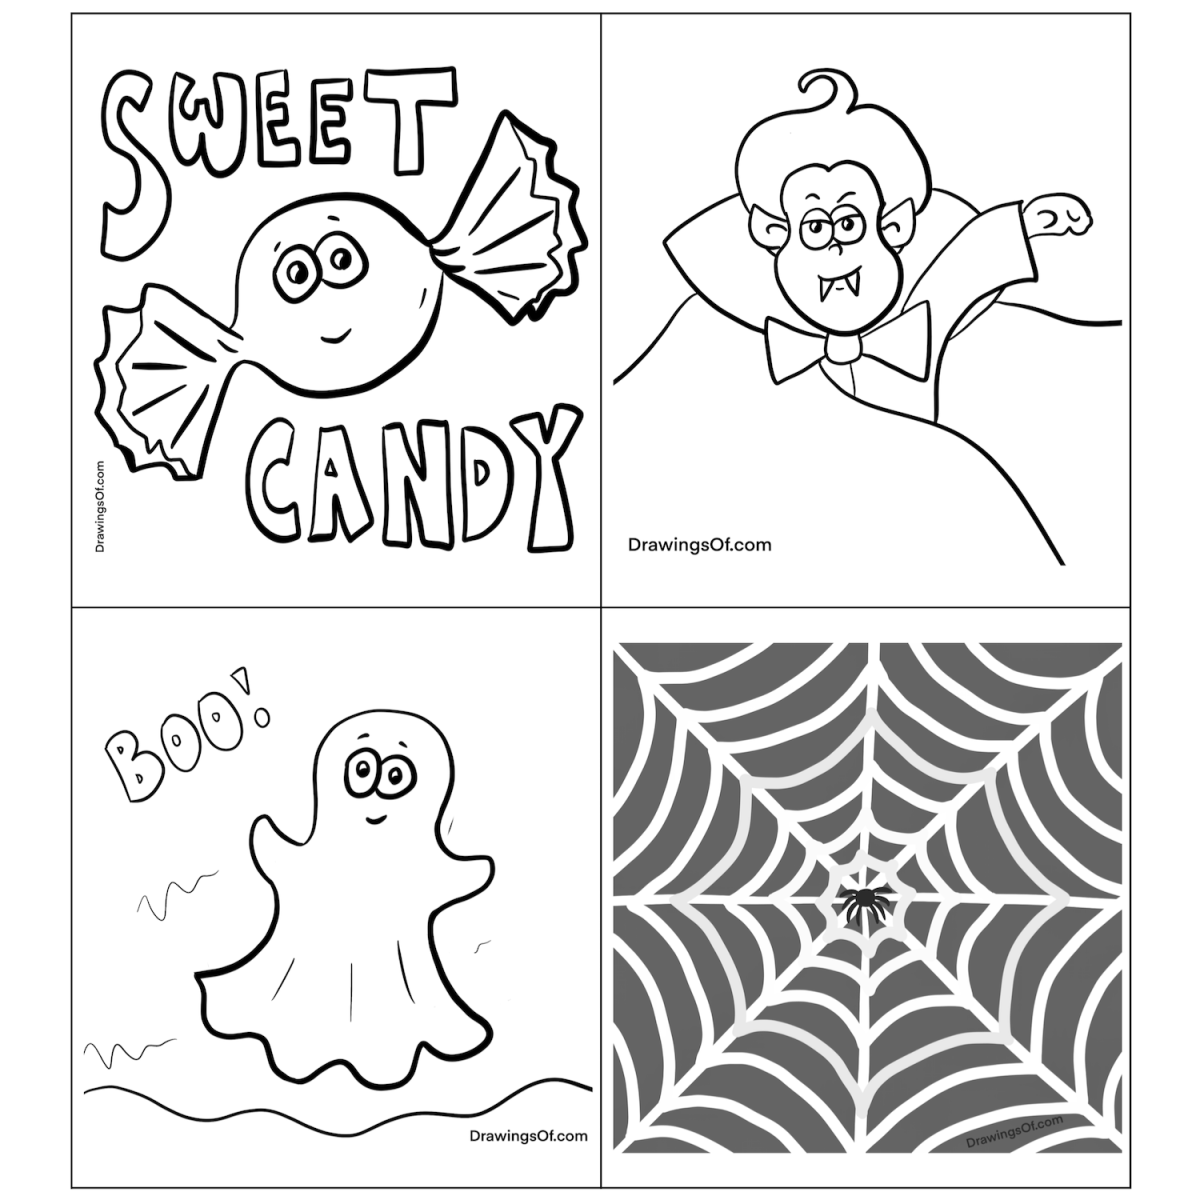 Halloween coloring pages for kids and adults